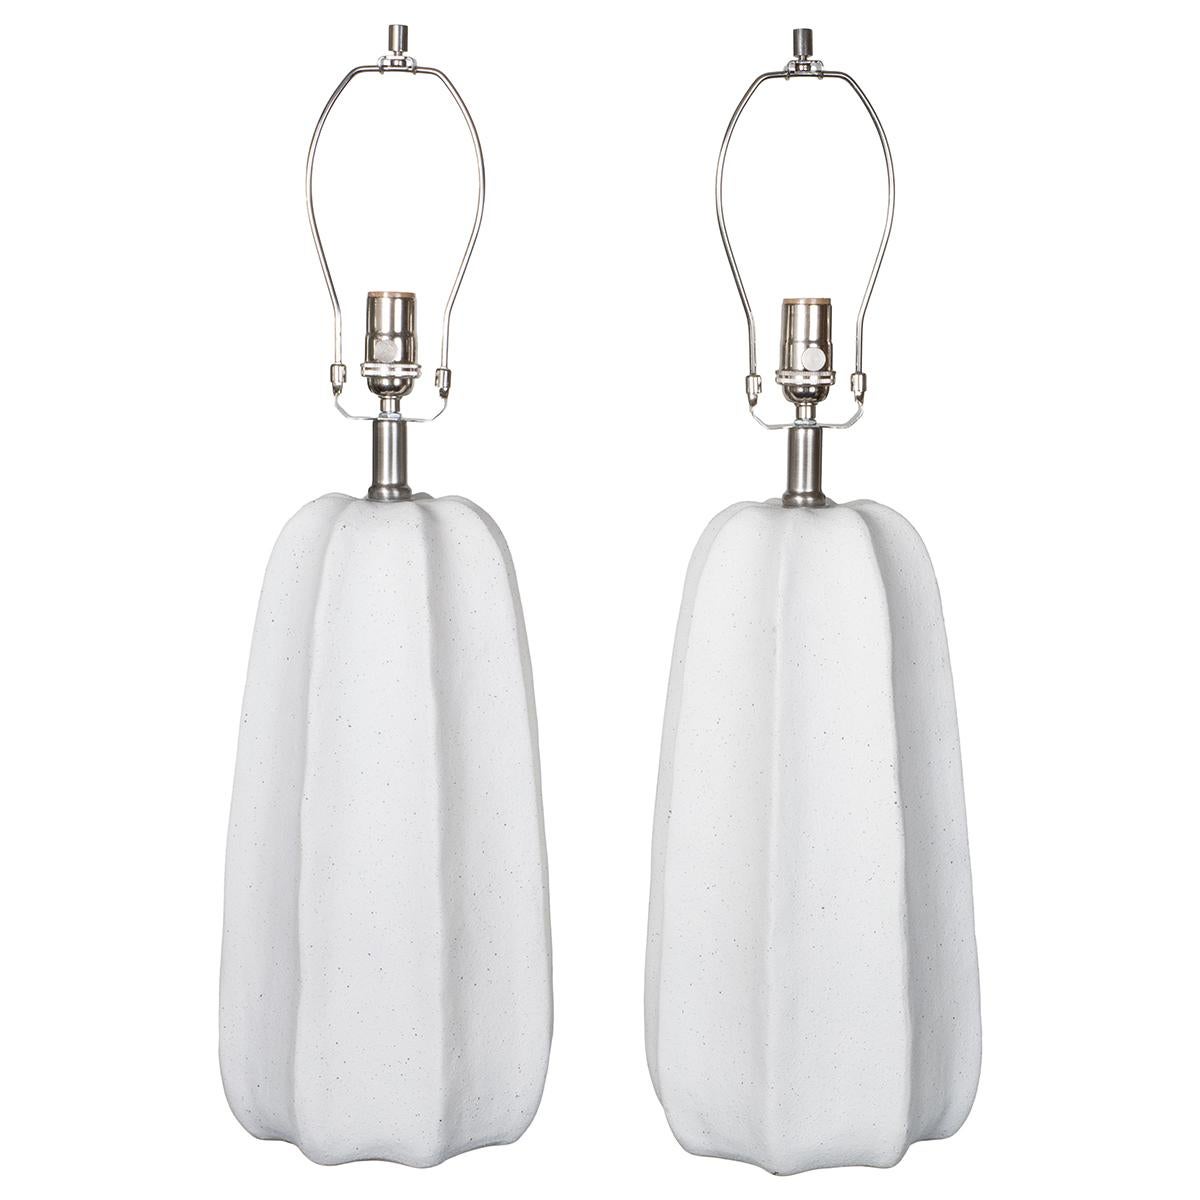 Pair of organic composition table lamps with channeled 